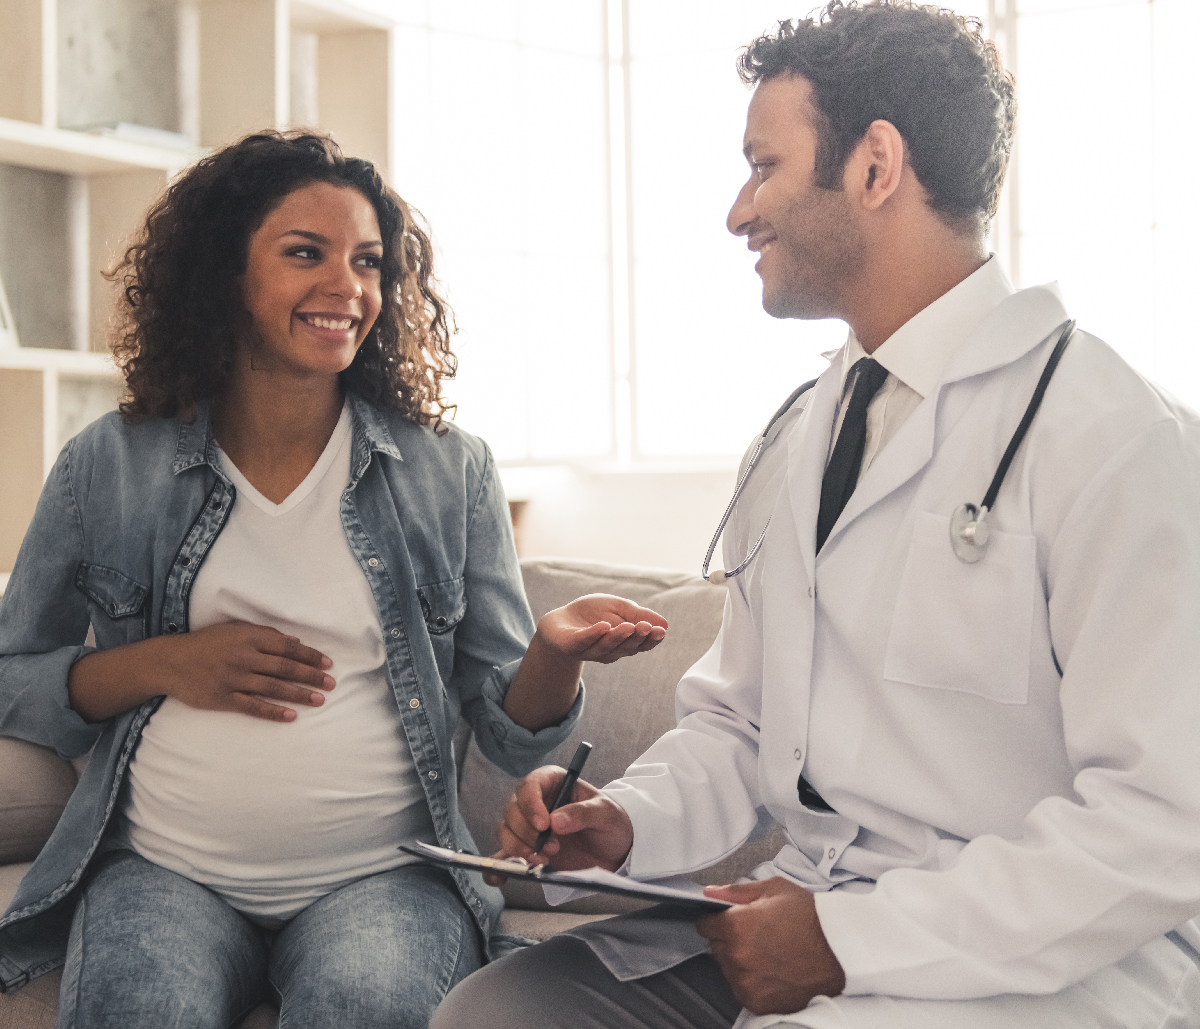 Baby talk: When to begin seeing an obstetrician